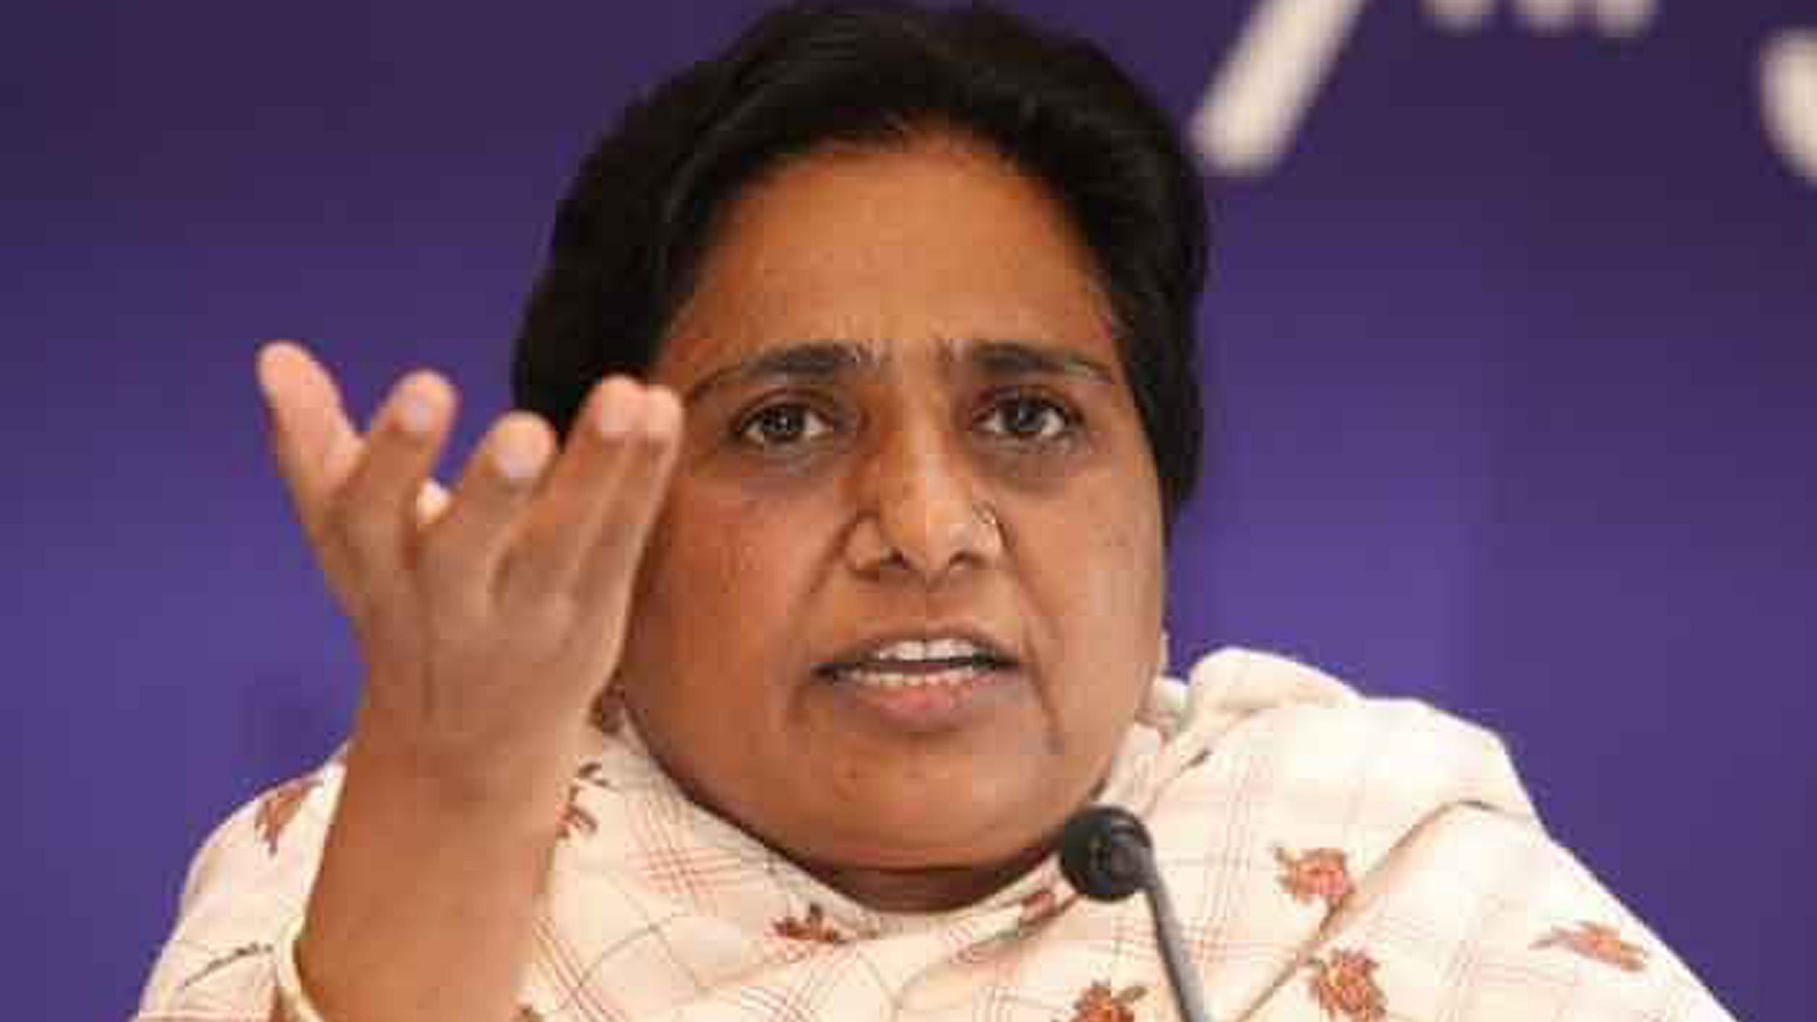 BSP Chief, Mayawati has been accused of “auctioning” tickets for Assembly polls in Uttar Pradesh. (Photo: PTI)